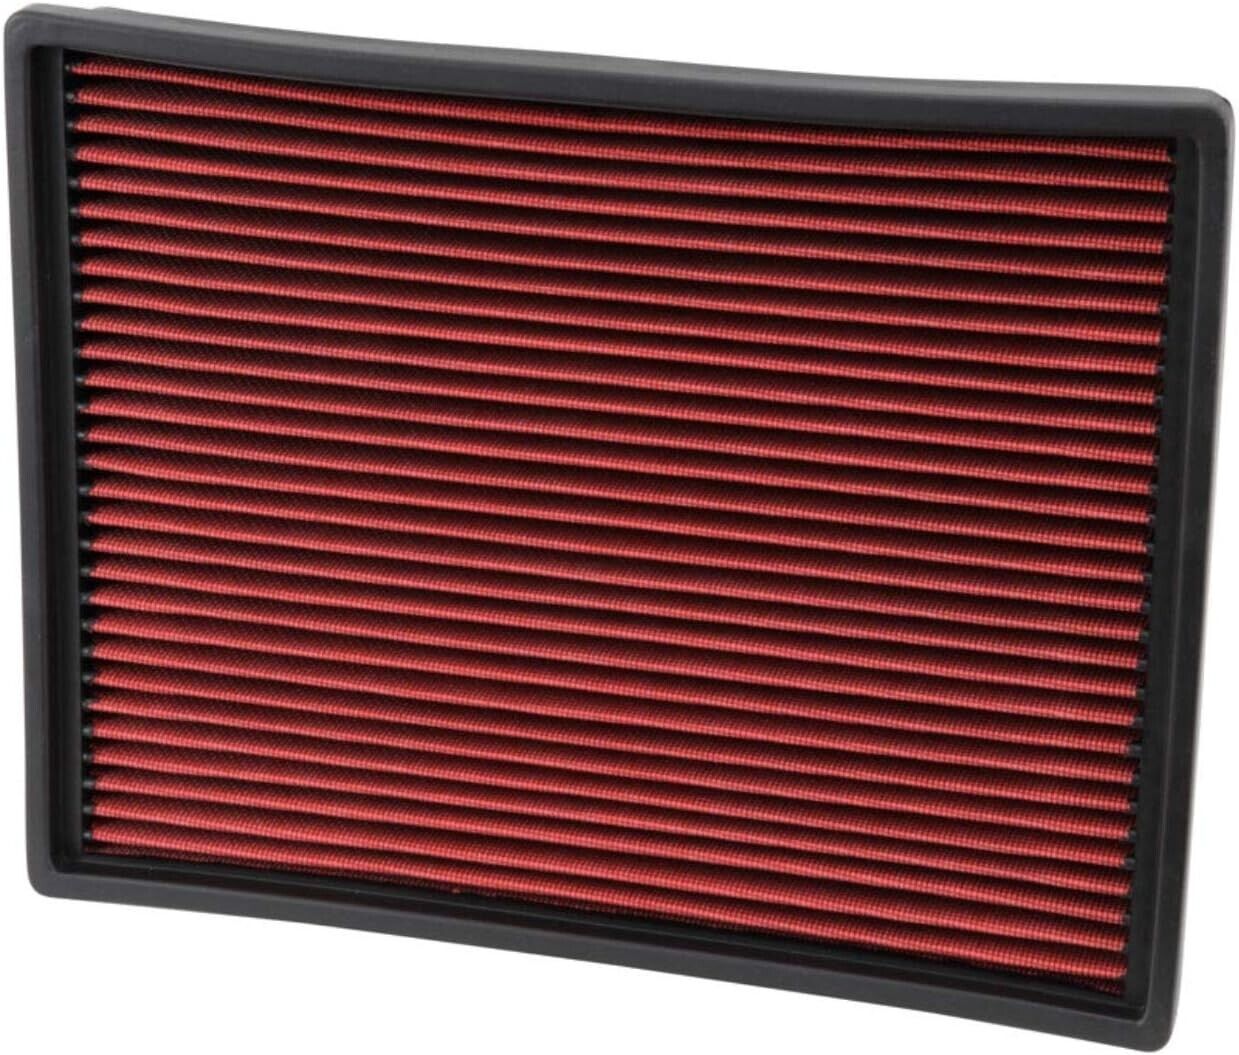 Spectre Performance Engine Air Filter: Premium, Washable, SPE-HPR8817